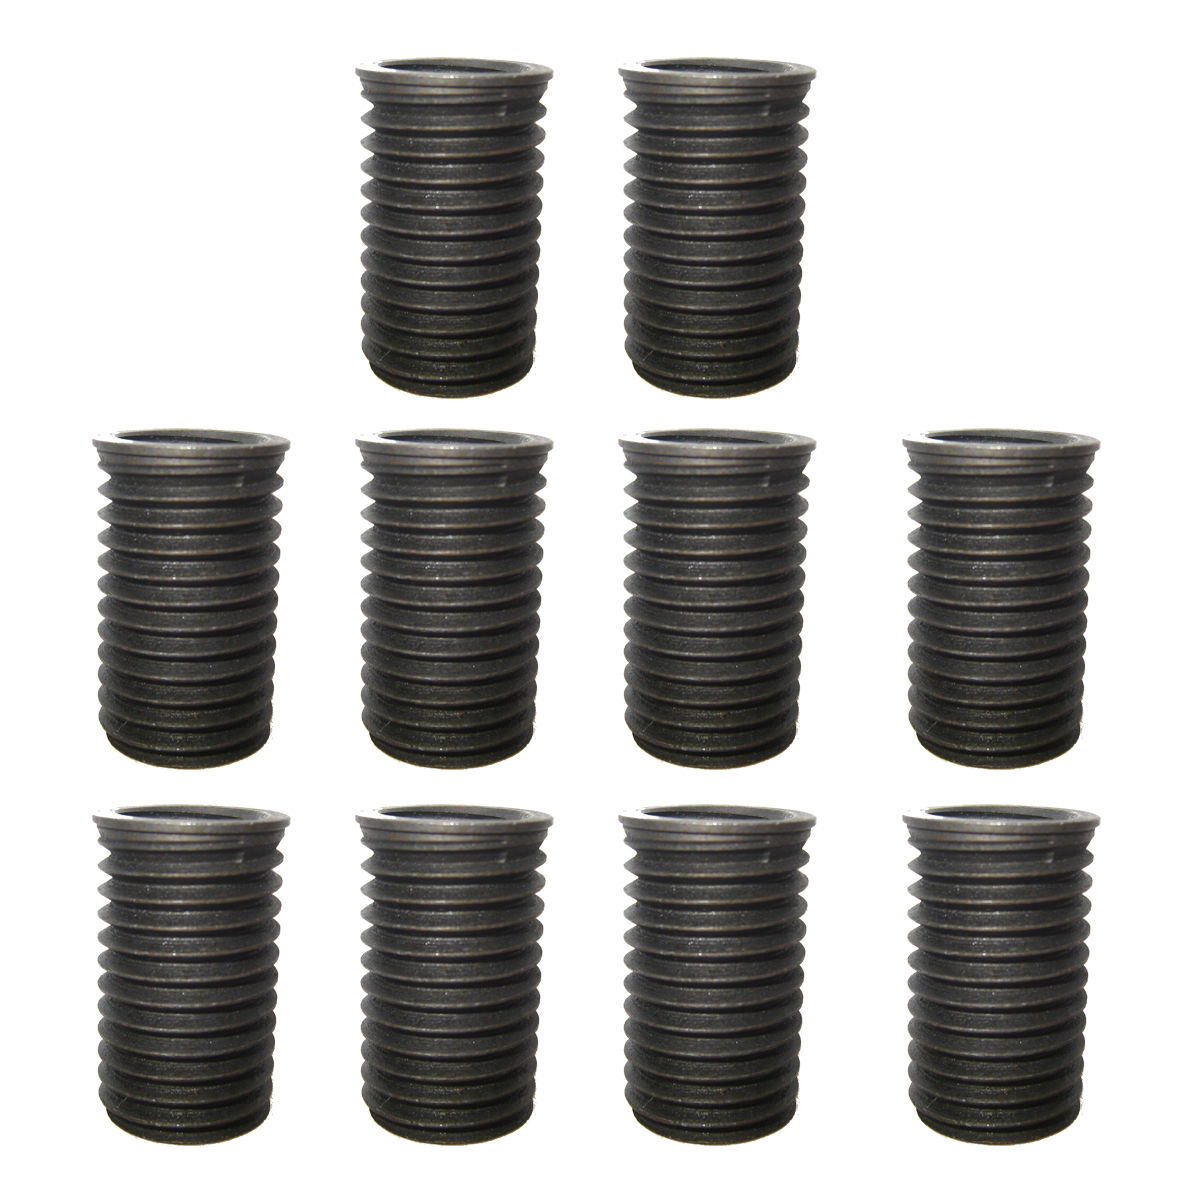 M11 x 1.5 Time-Sert Metric Carbon Steel Inserts Archives - Thread